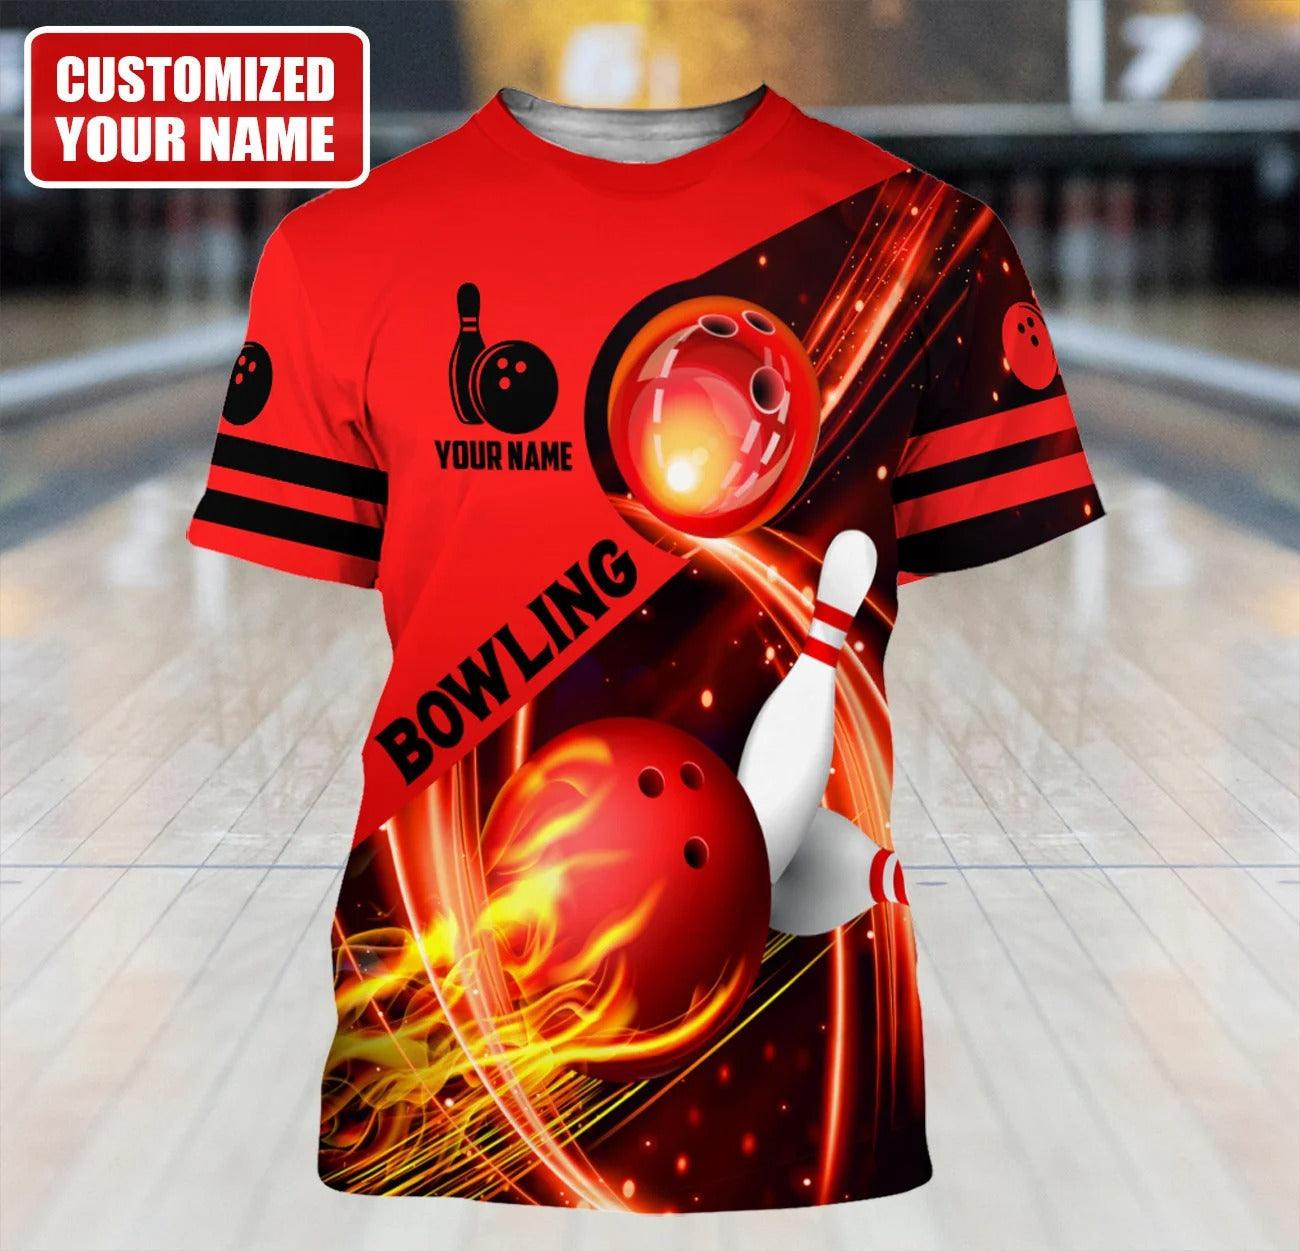 Customized Name Red Bowling T Shirt, Personalized T Shirt For Men And Women - Perfect Gift For Bowling Lovers, Bowling Team - Amzanimalsgift